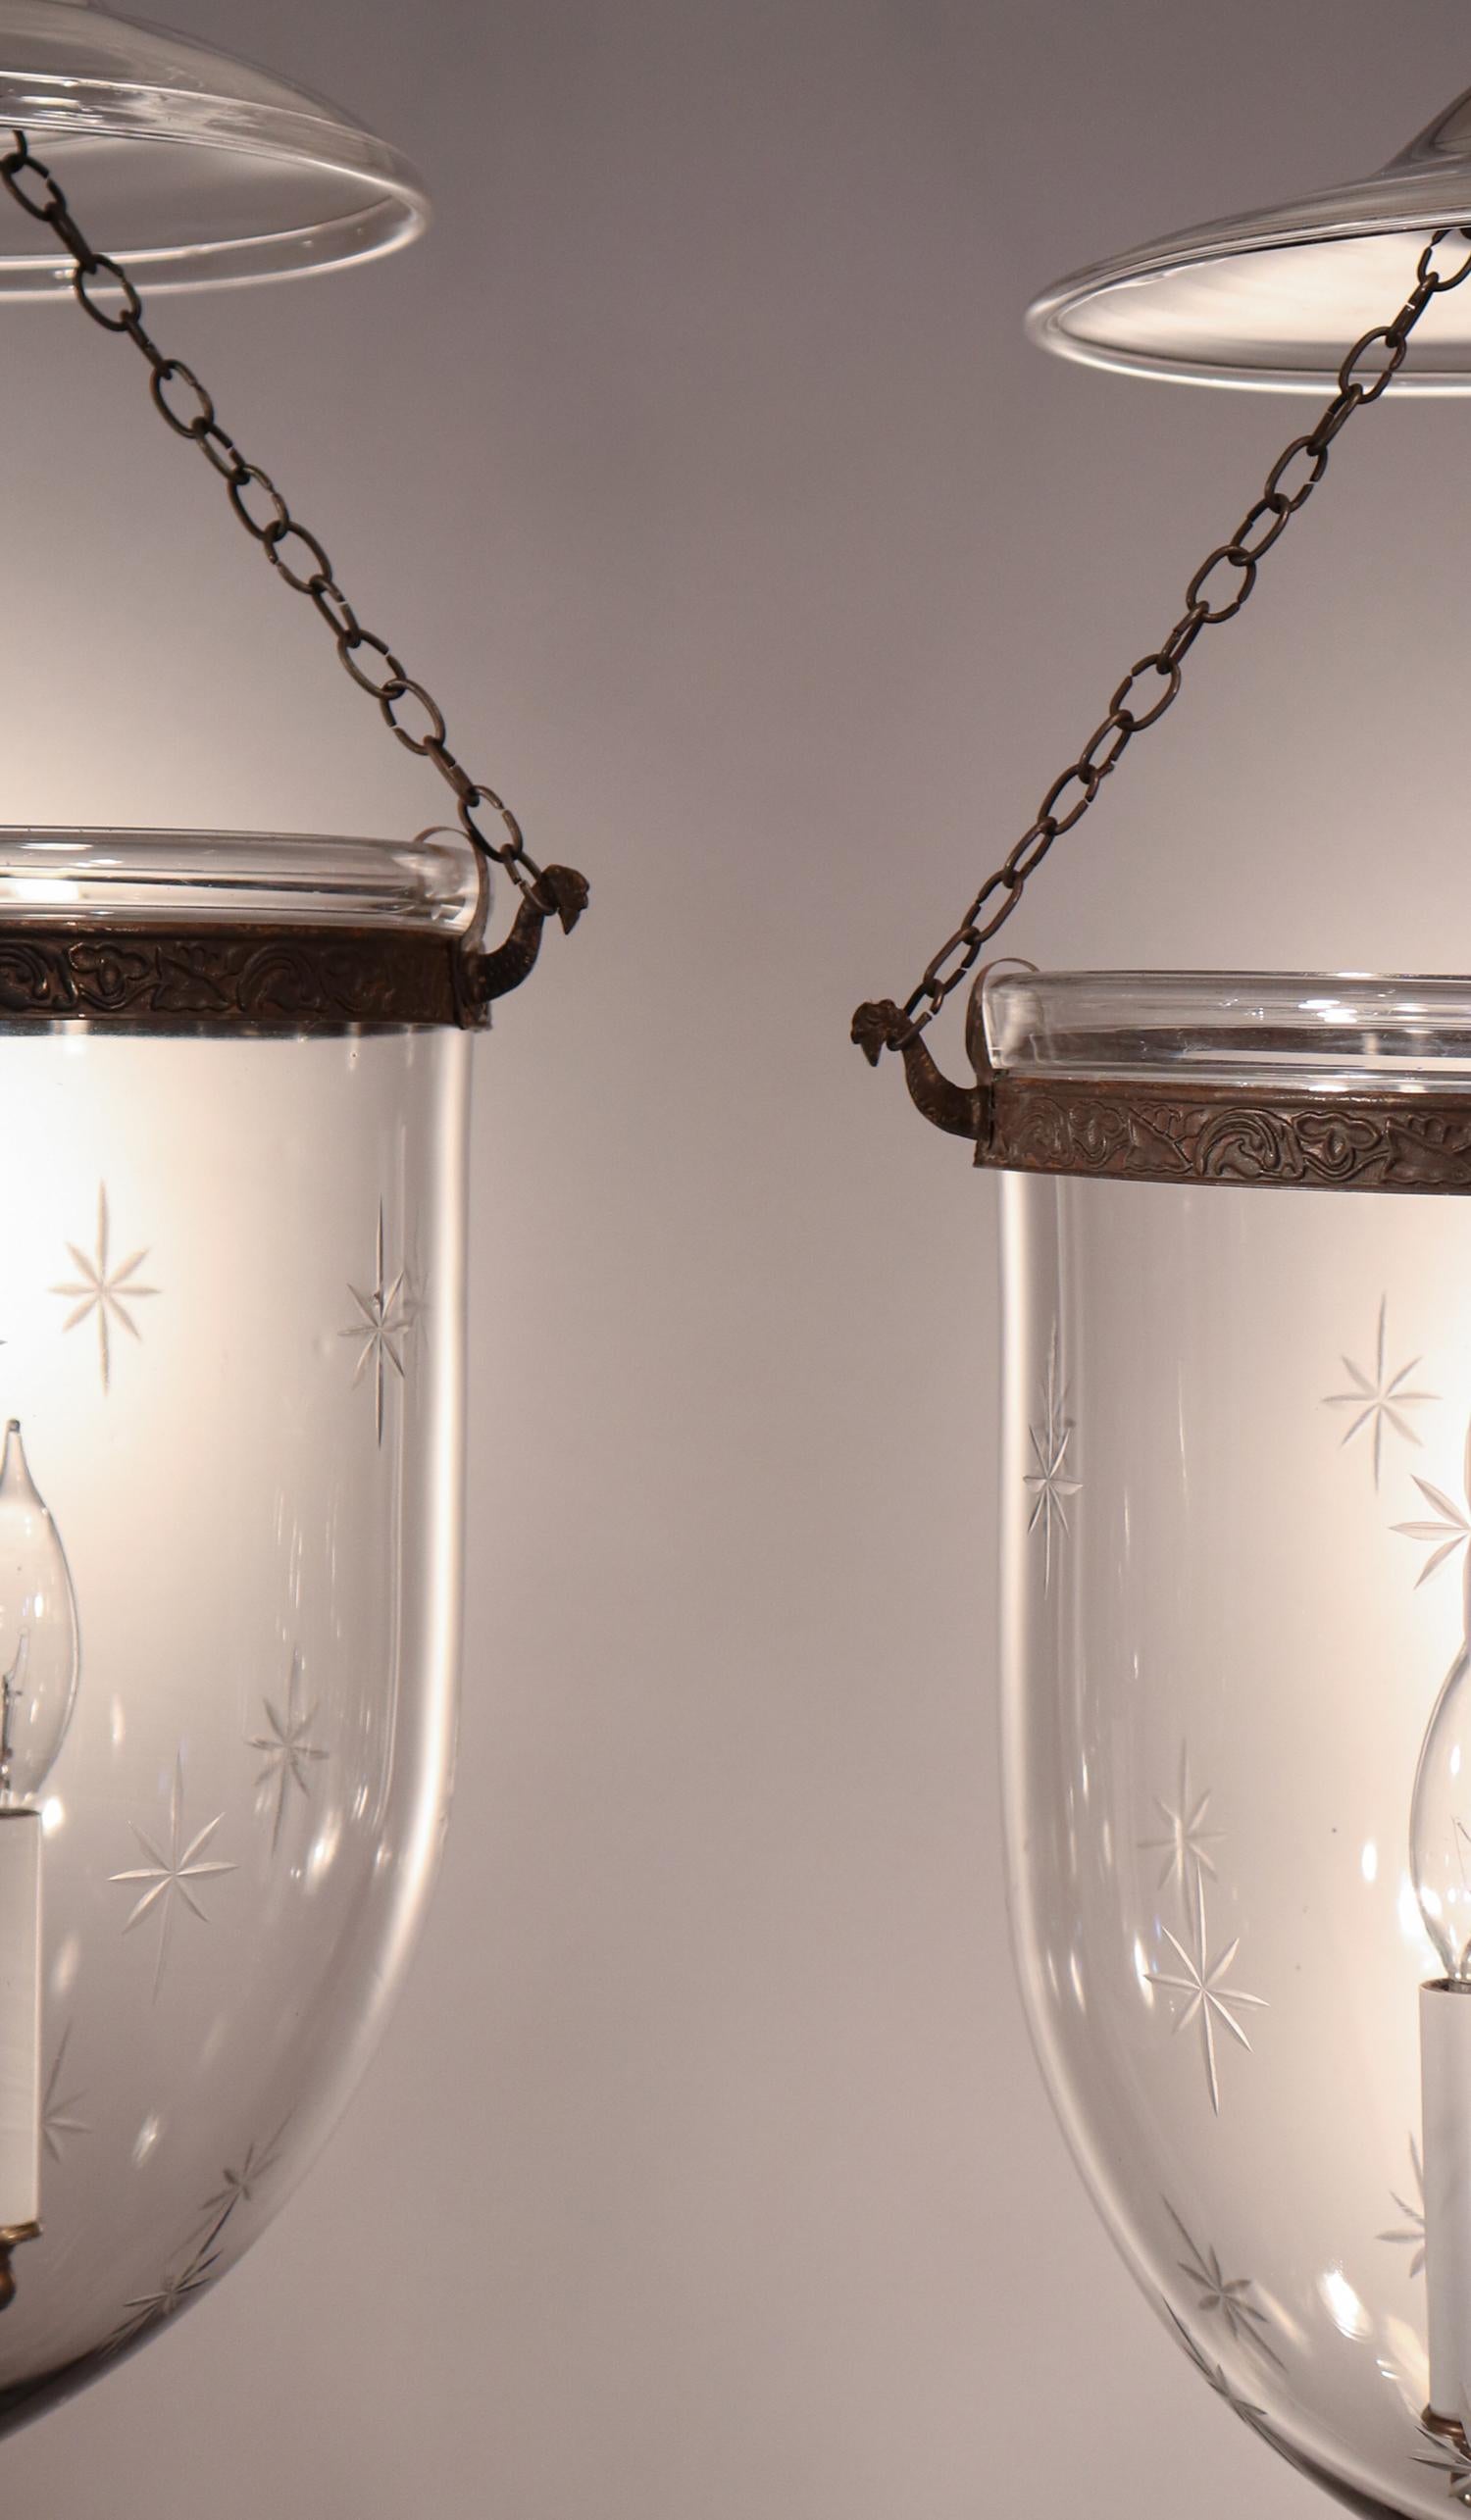 English Pair of Antique Bell Jar Lanterns with Etched Stars